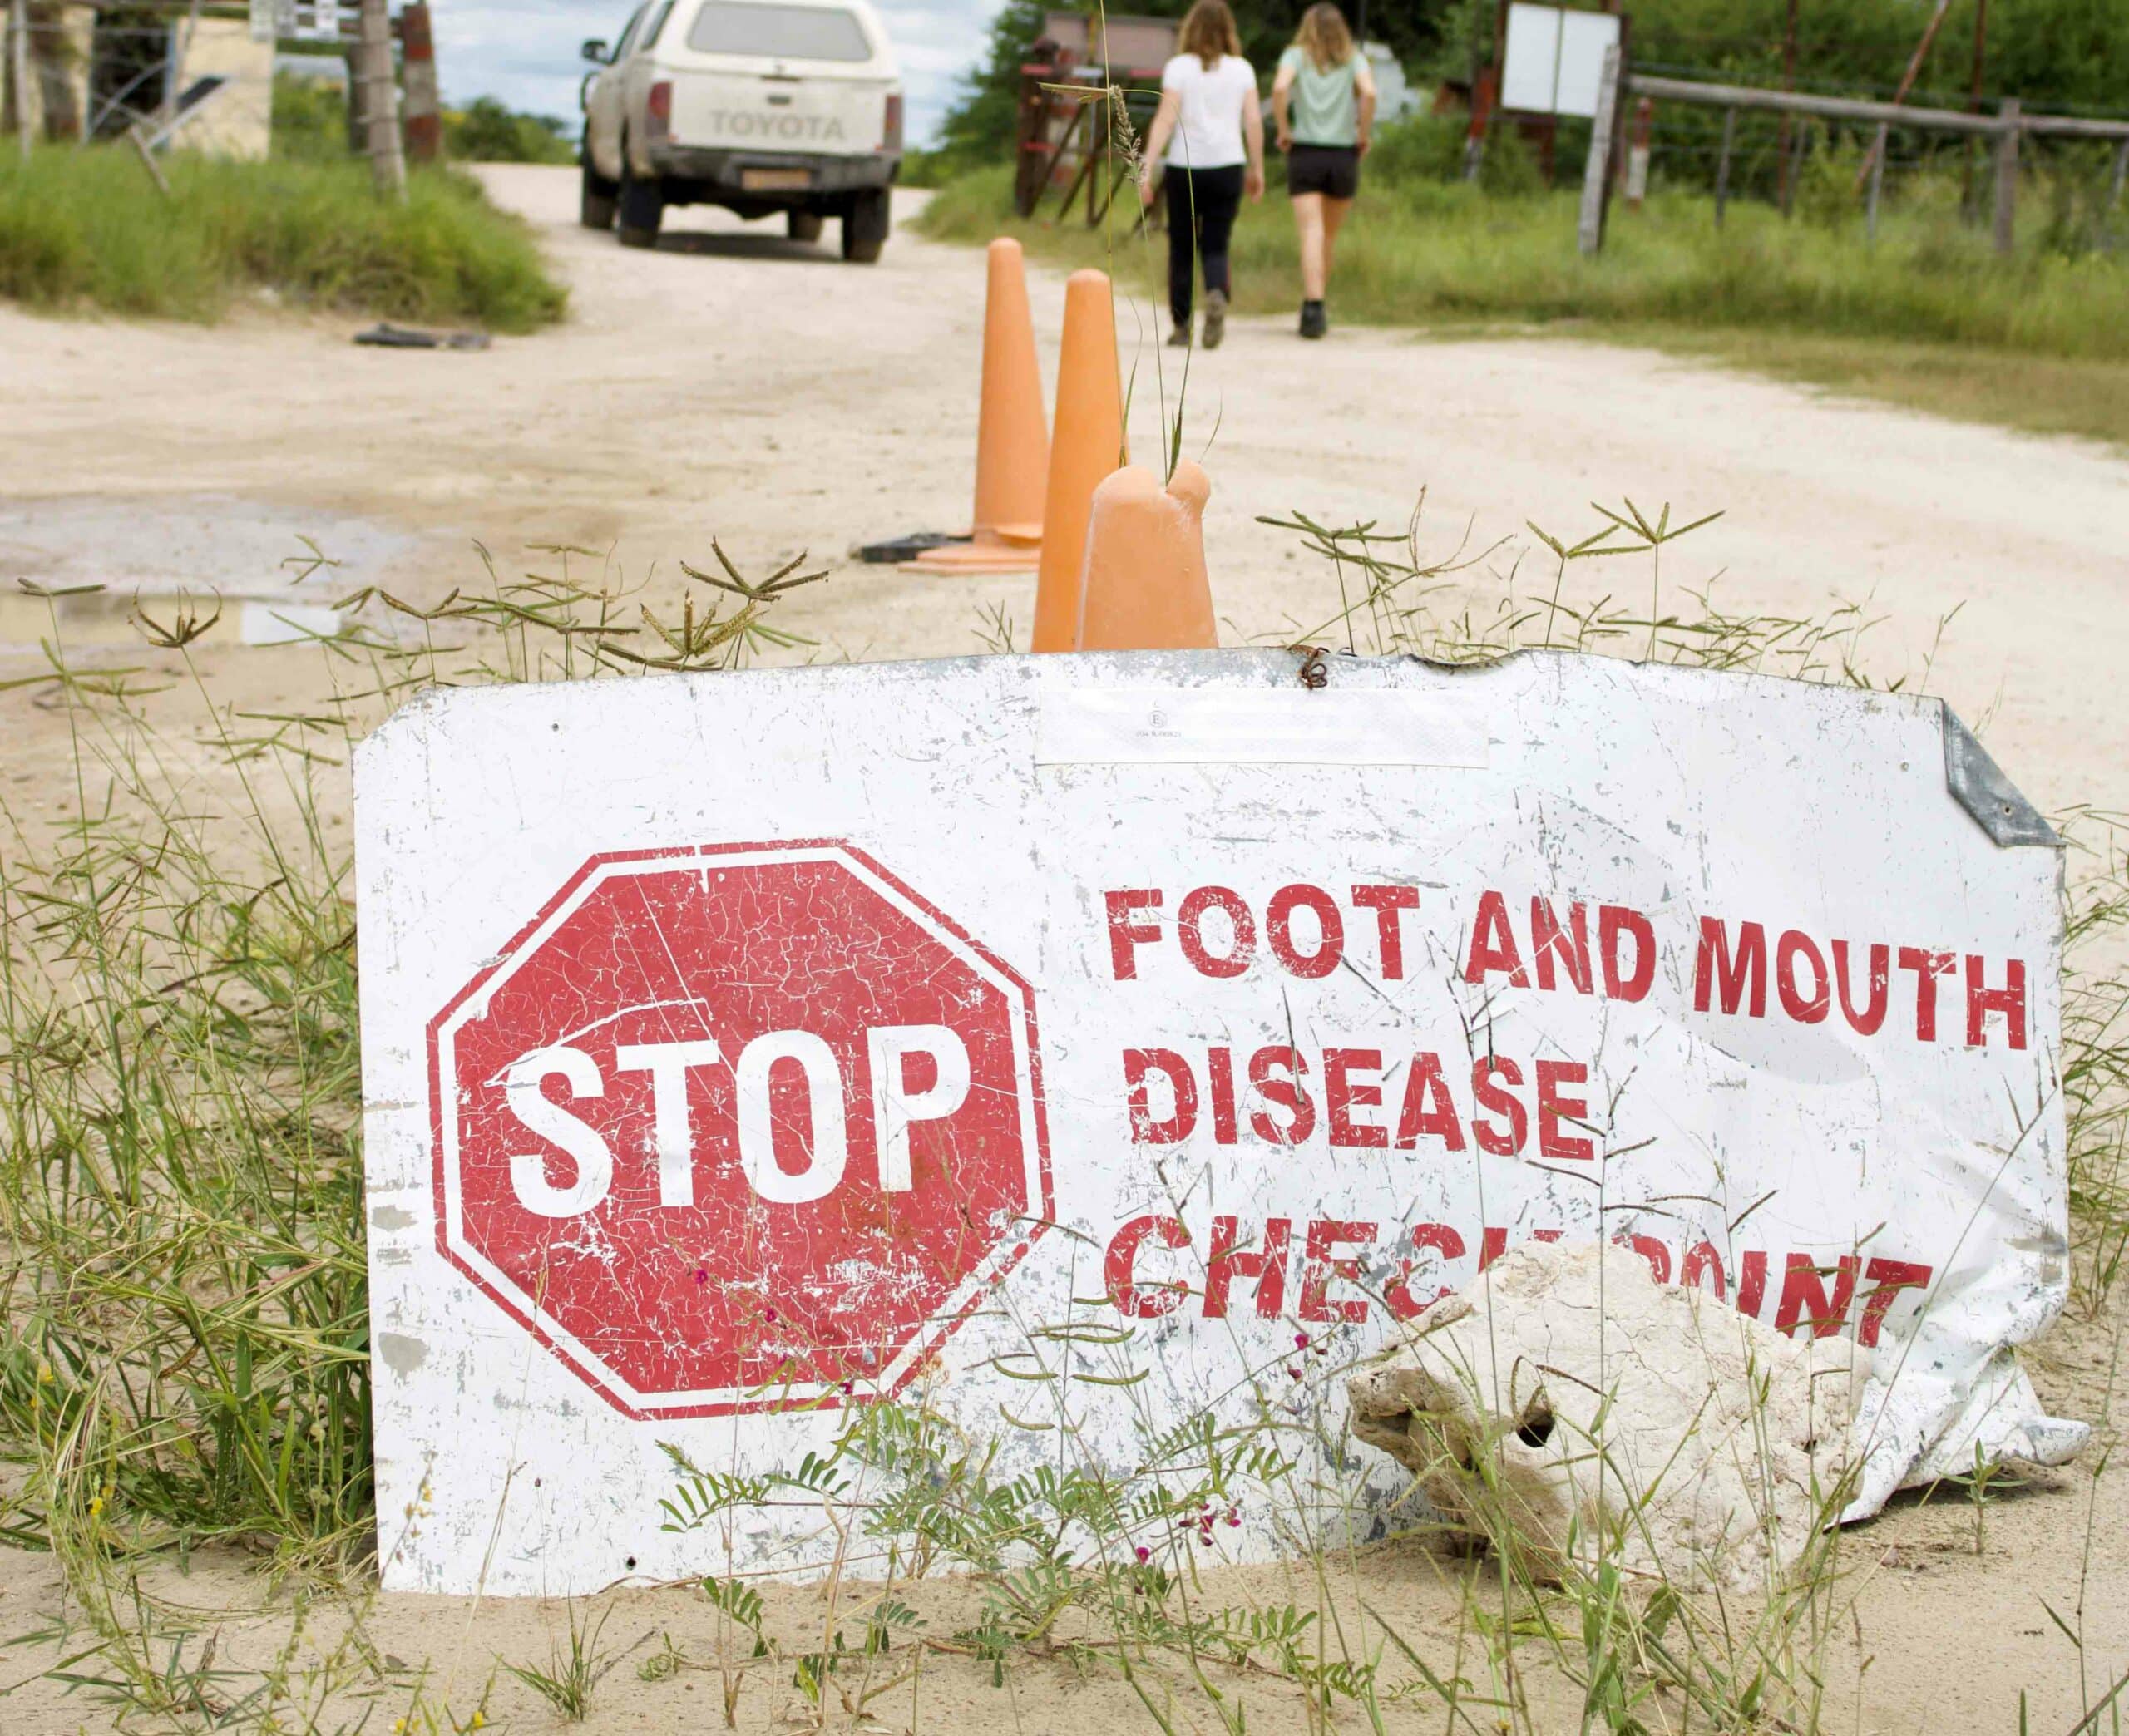 Picture showing the warning sign of a foot and mouth disease checkpoint